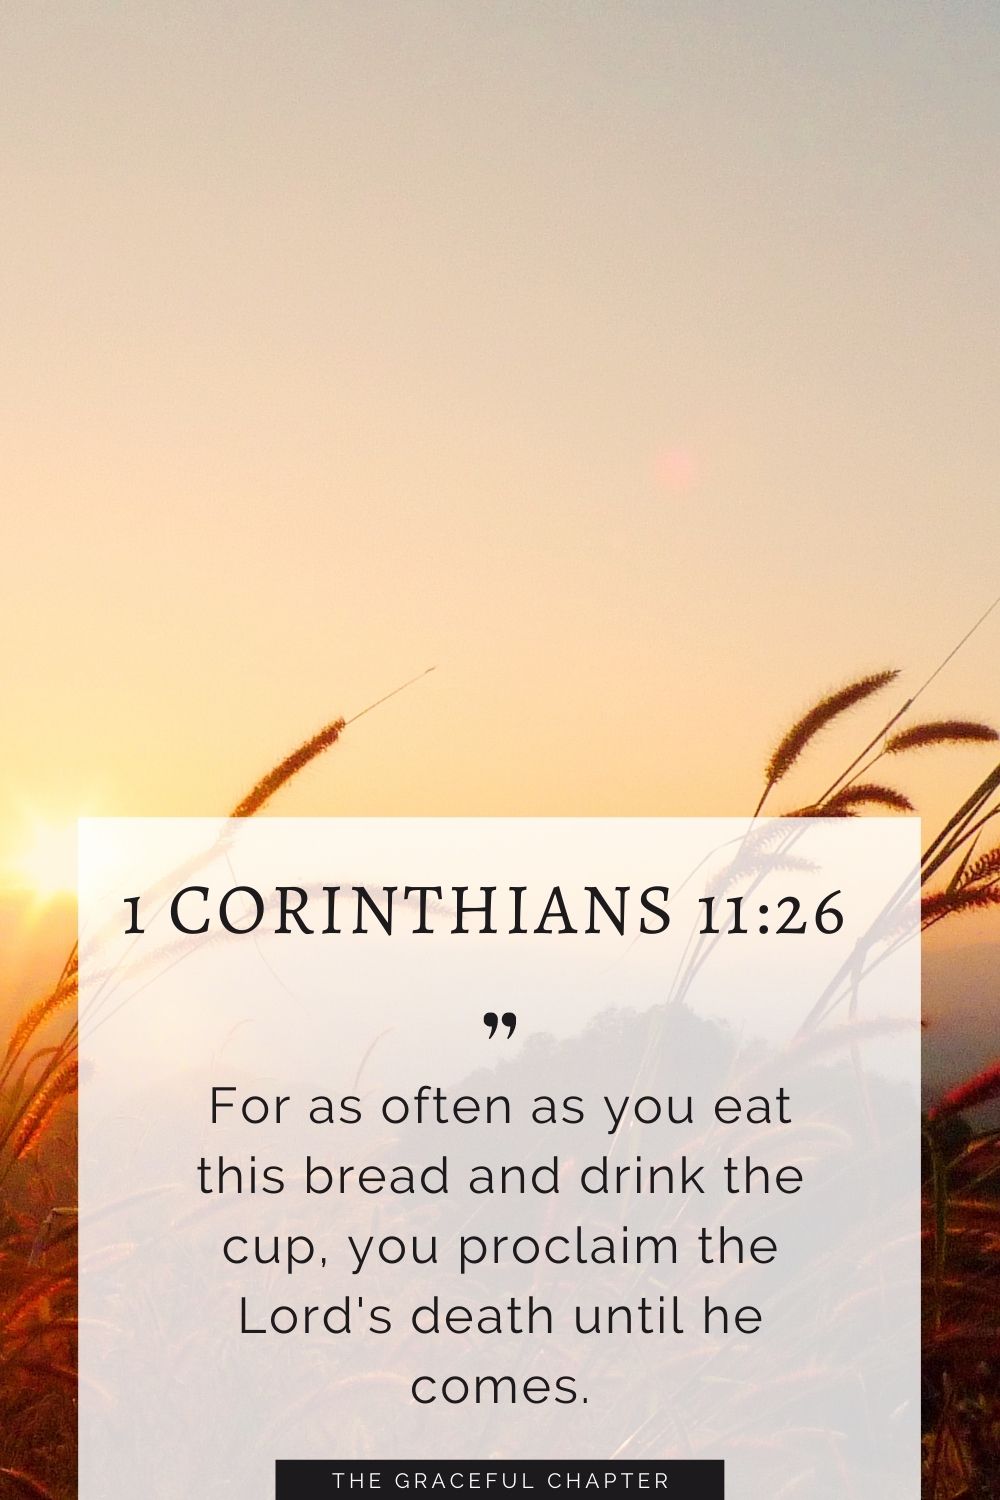 For as often as you eat this bread and drink the cup, you proclaim the Lord's death until he comes. 1 Corinthians 11:26